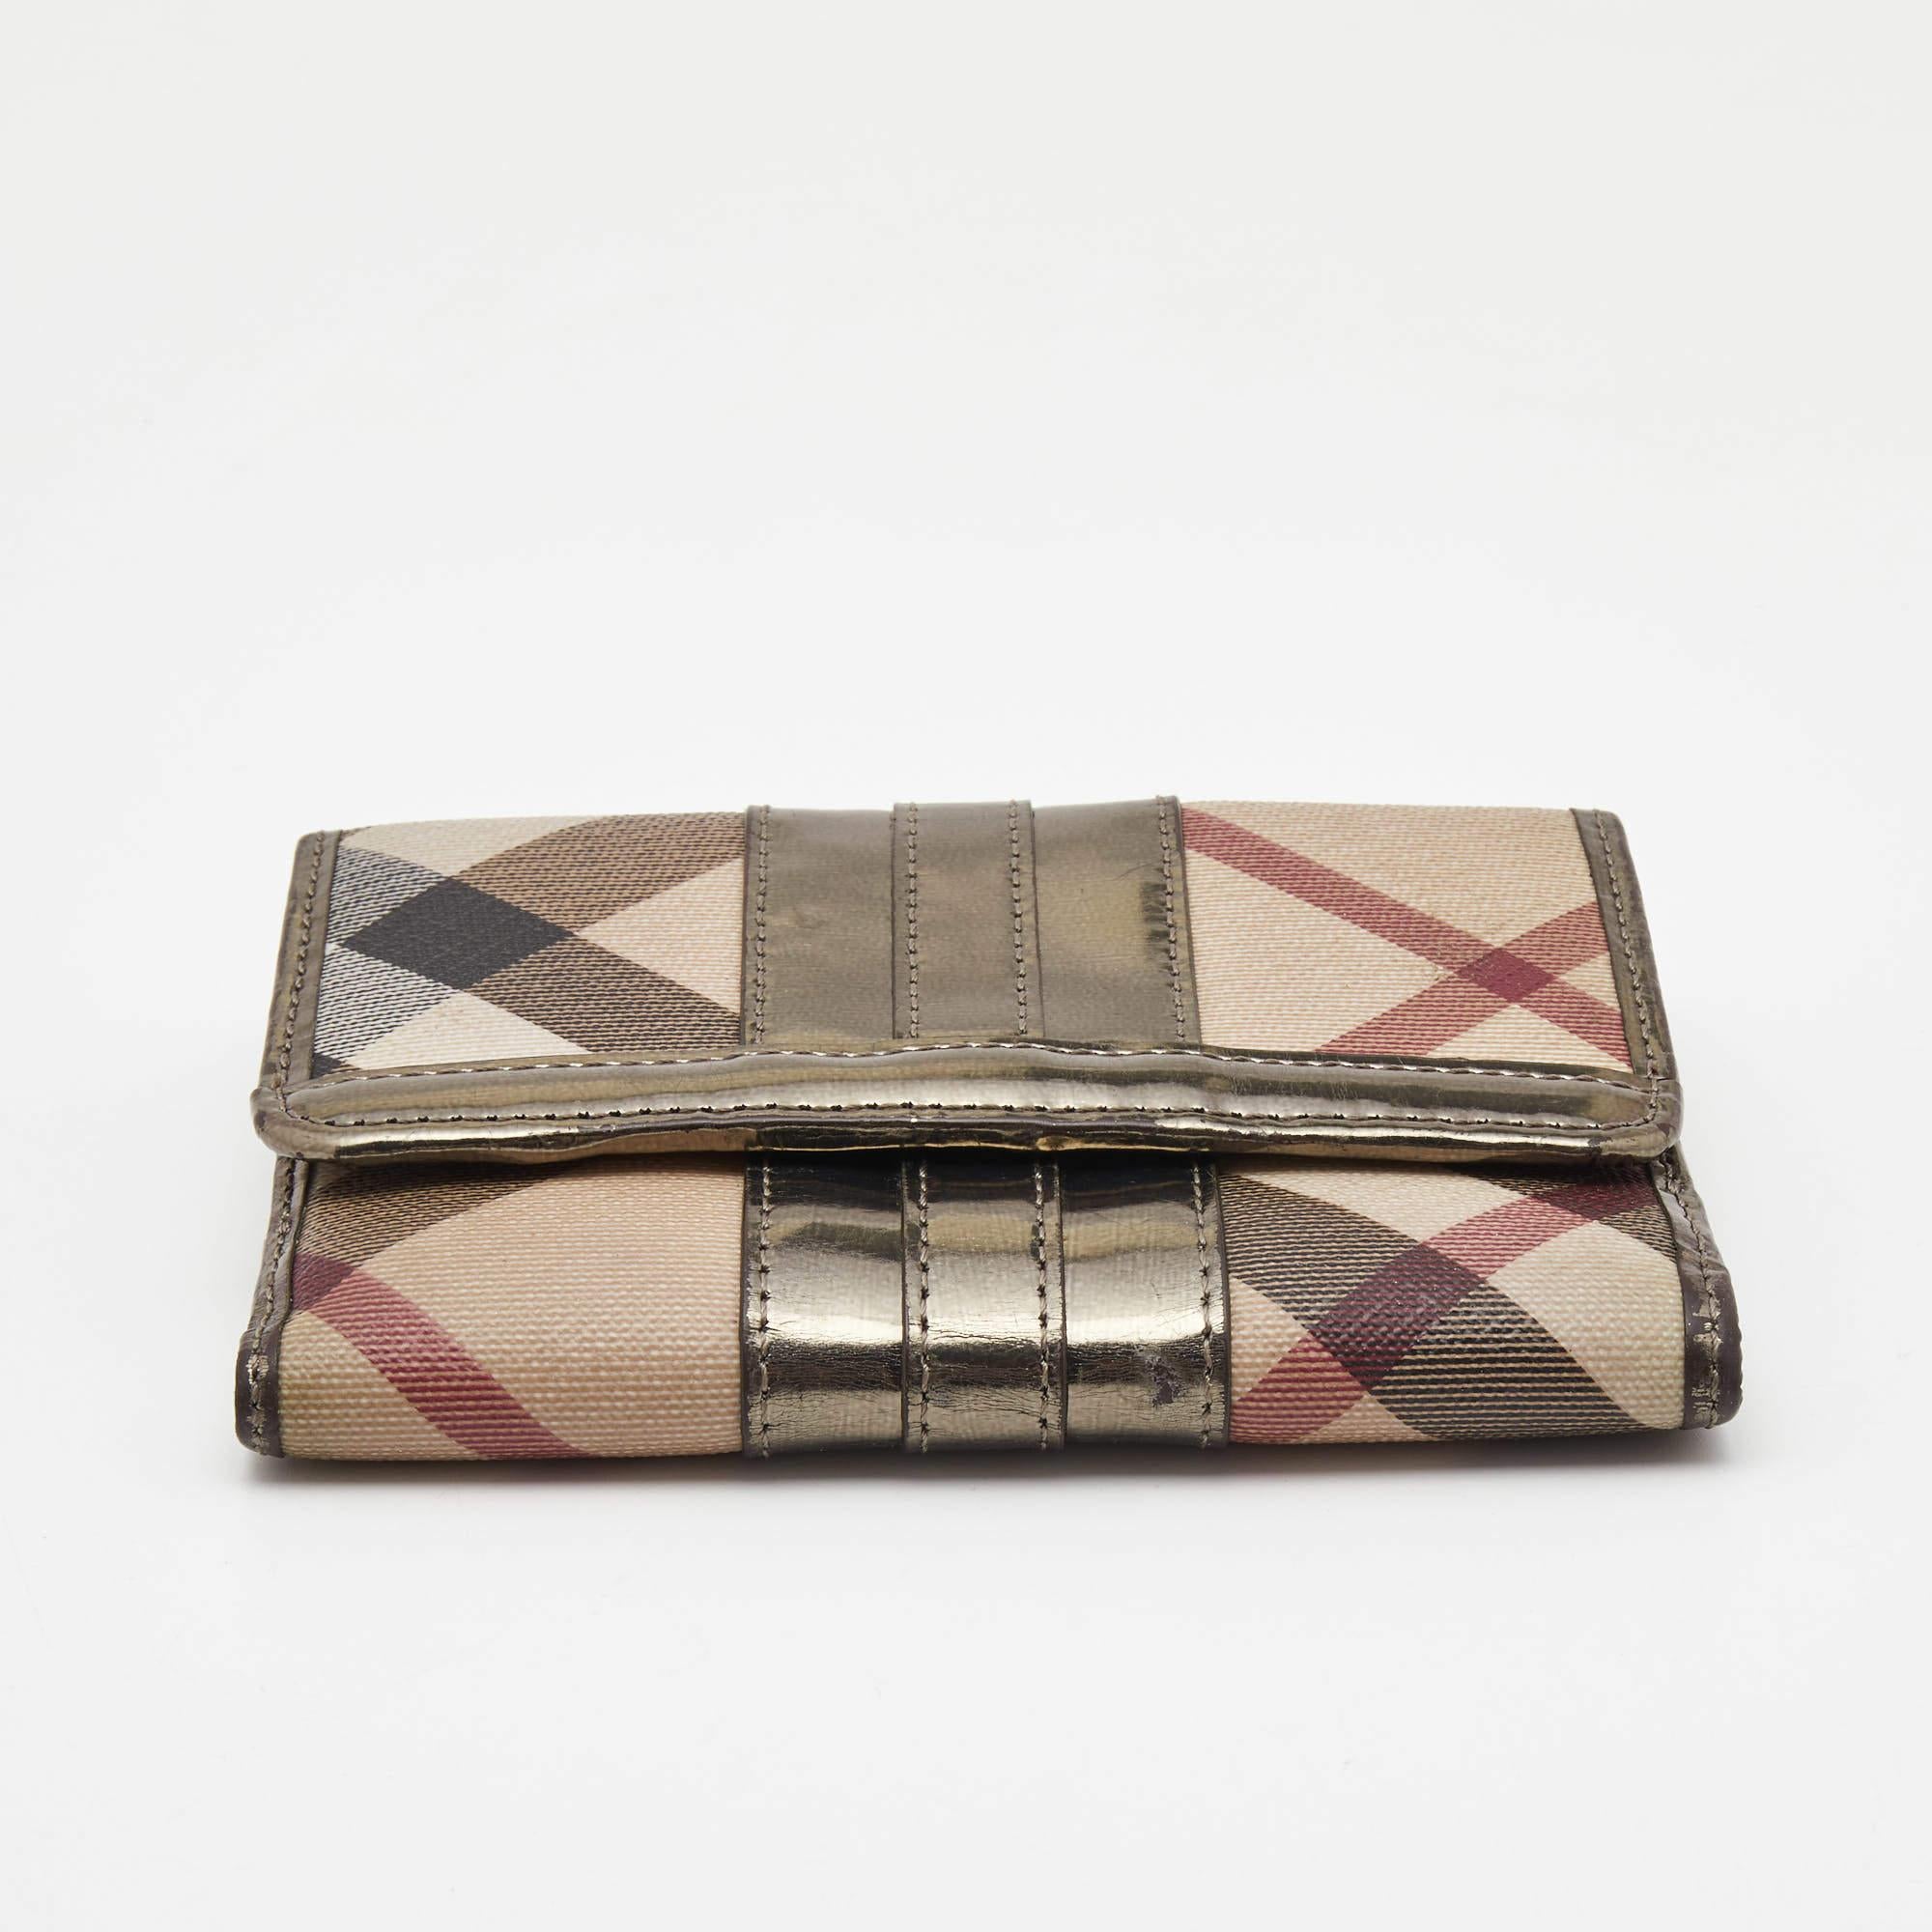 Burberry Metallic/Beige Nova Check PVC and Patent Leather French Wallet In Good Condition For Sale In Dubai, Al Qouz 2